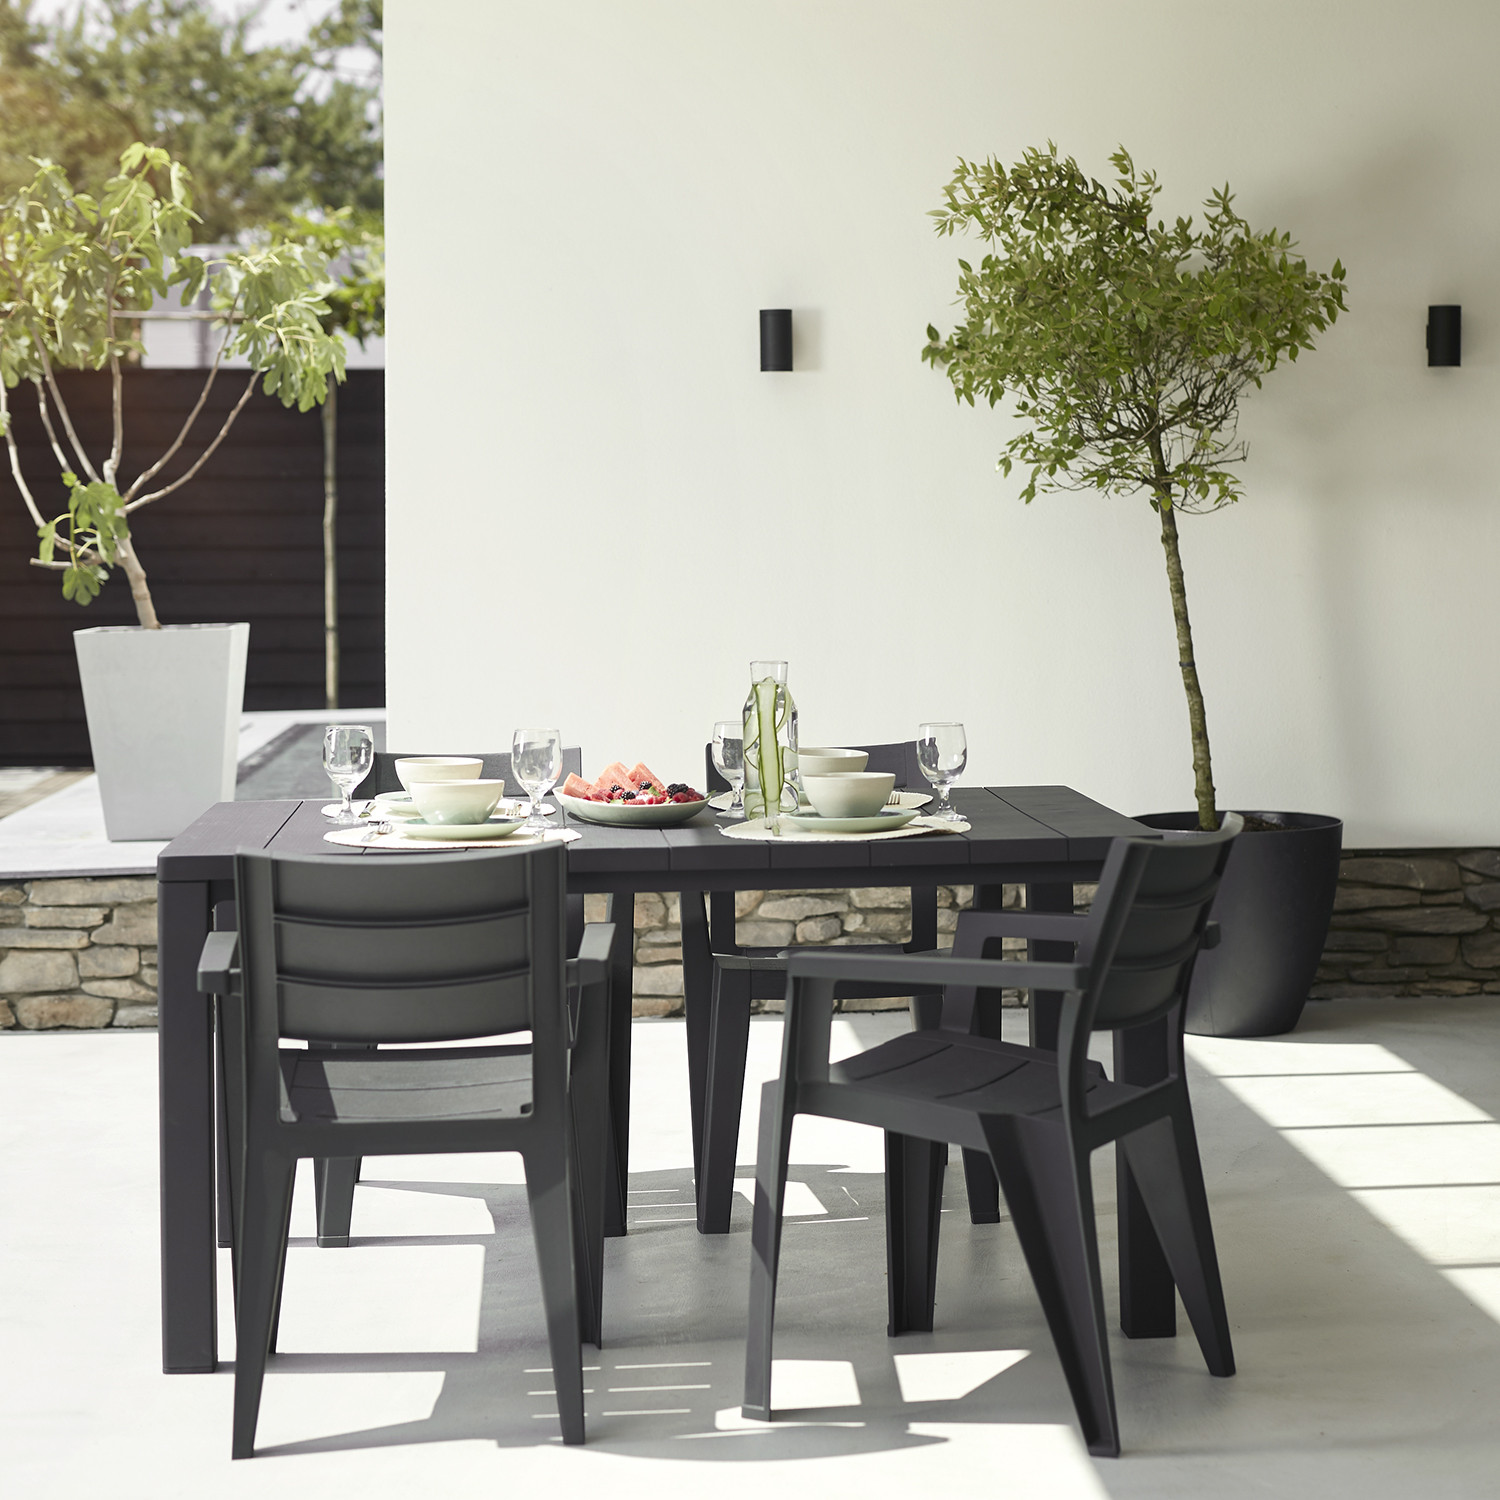 Keter Julie 6 Seater Patio Table Graphite Image 1